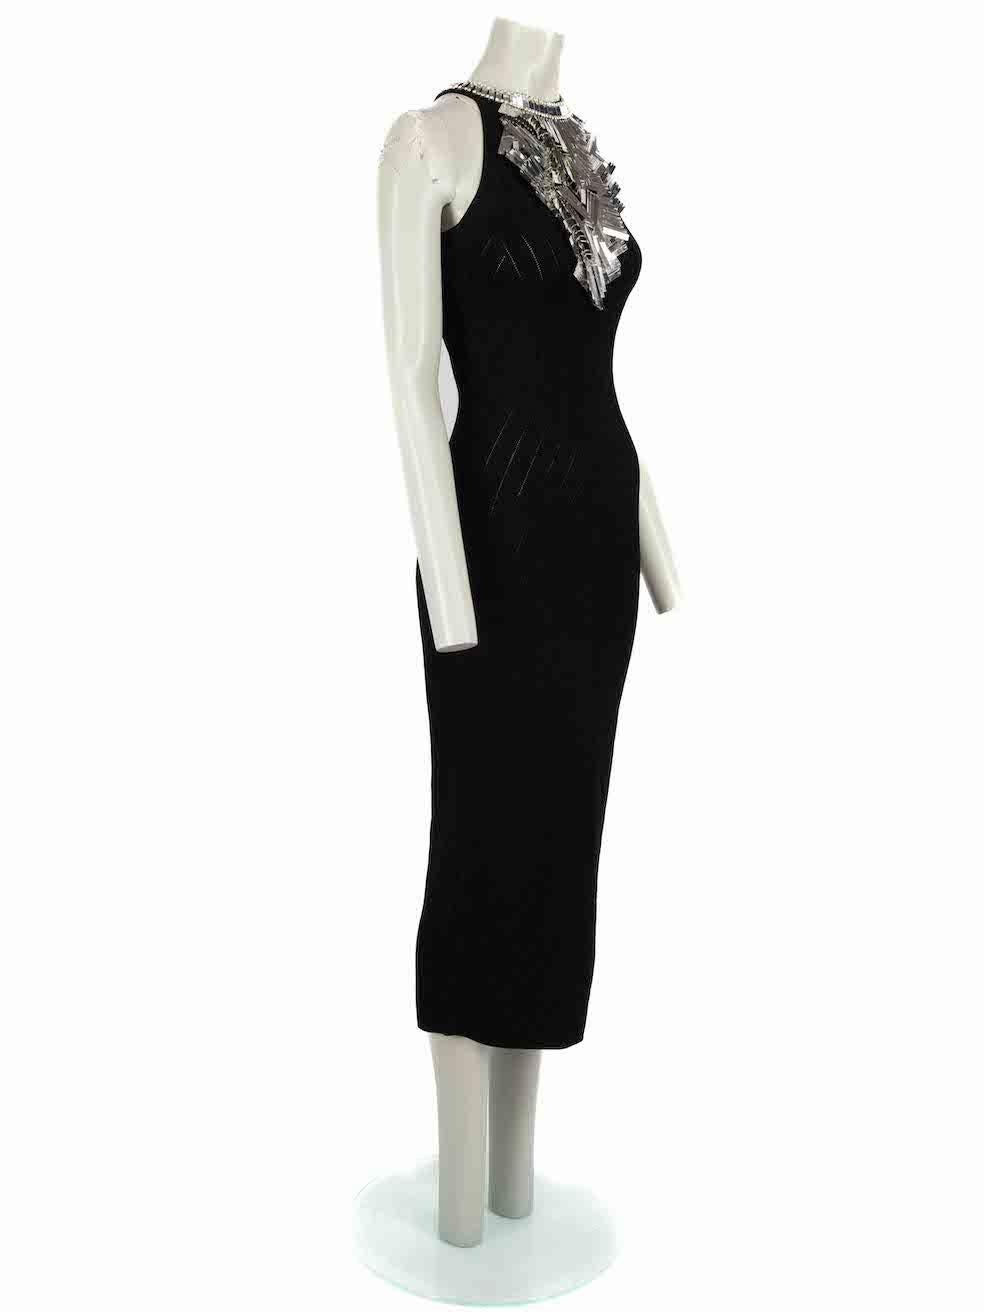 CONDITION is Very good. Minimal wear to dress is evident. Minimal wear to the sequin embellishment with scratches to the sequins on this used Balmain designer resale item.
 
Details
Black
Viscose
Knit dress
Figure hugging